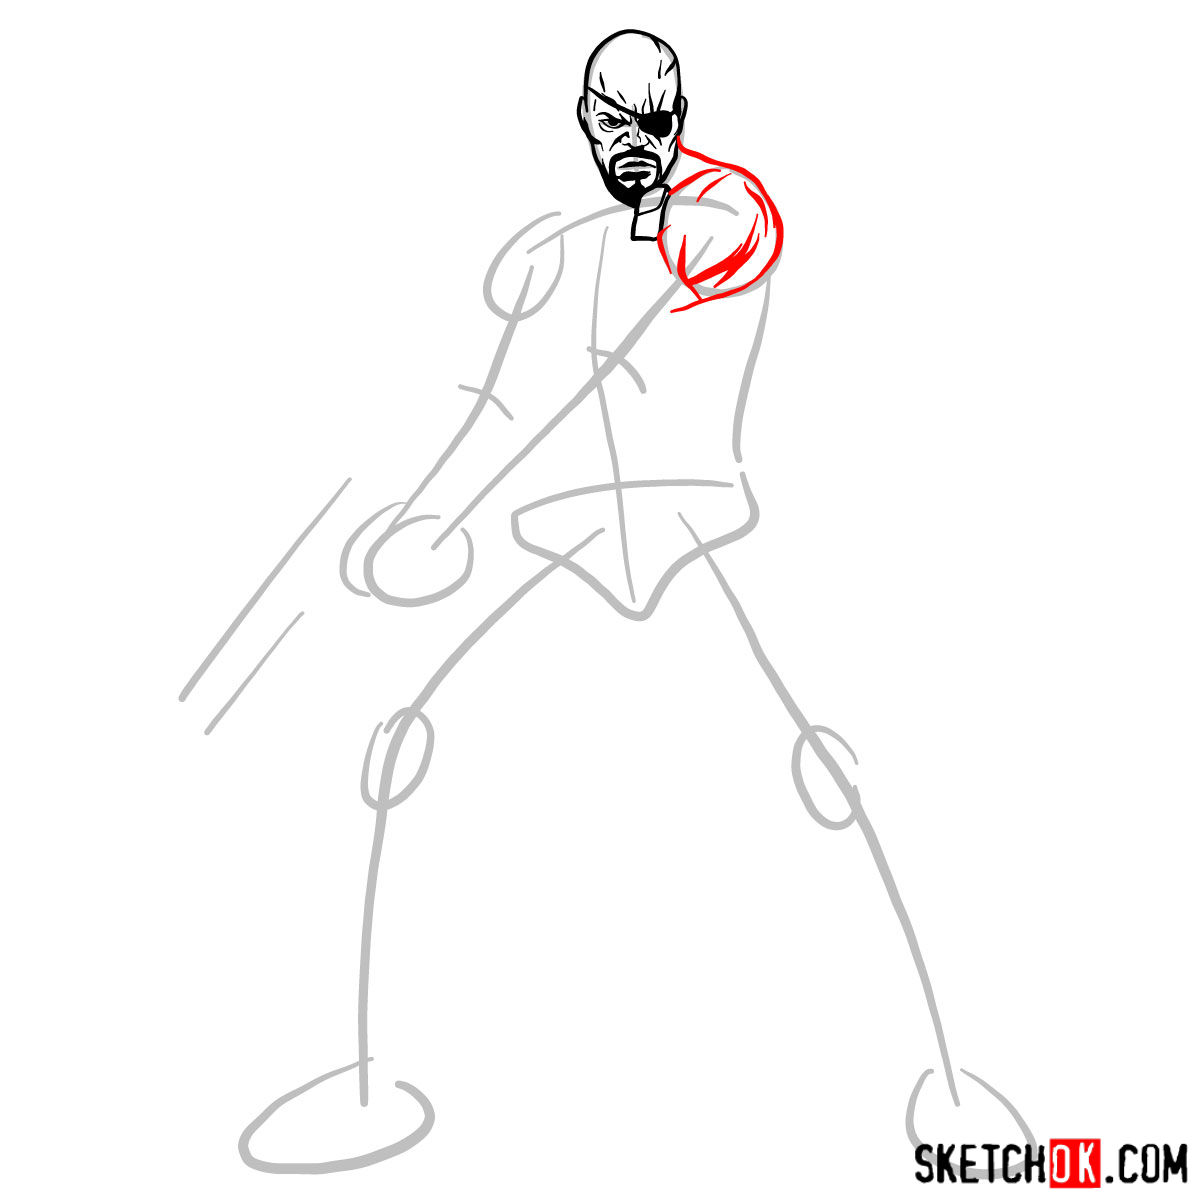 How to draw Nick Fury from the Avengers - step 05